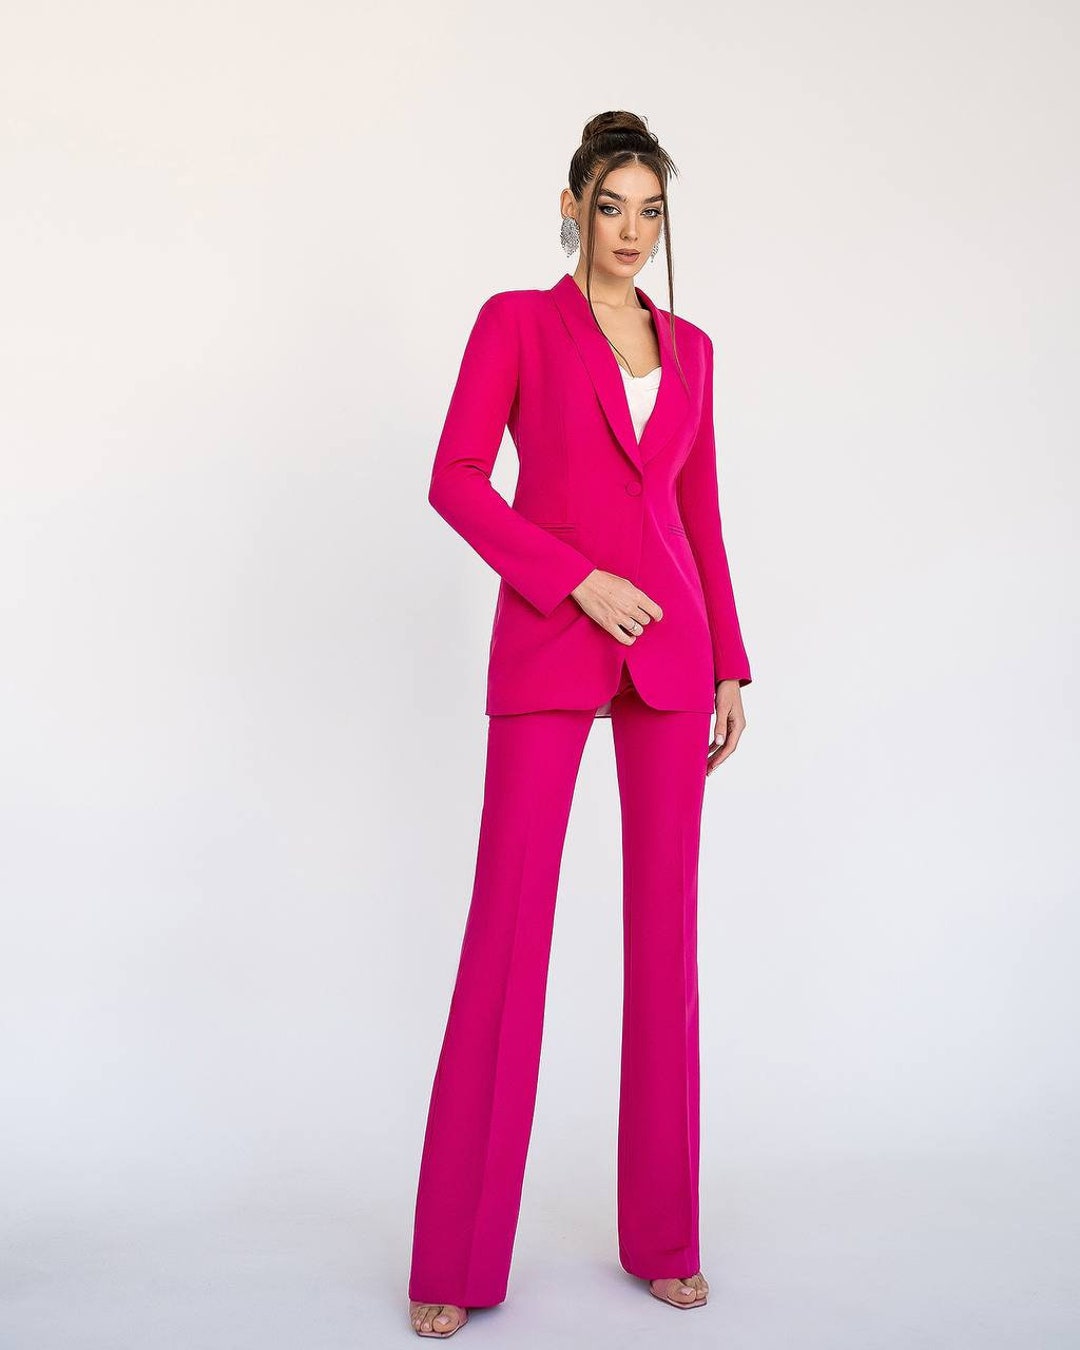 Hot Pink Flared Pants Suit Set With Blazer, Pink Blazer Trouser Suit ...